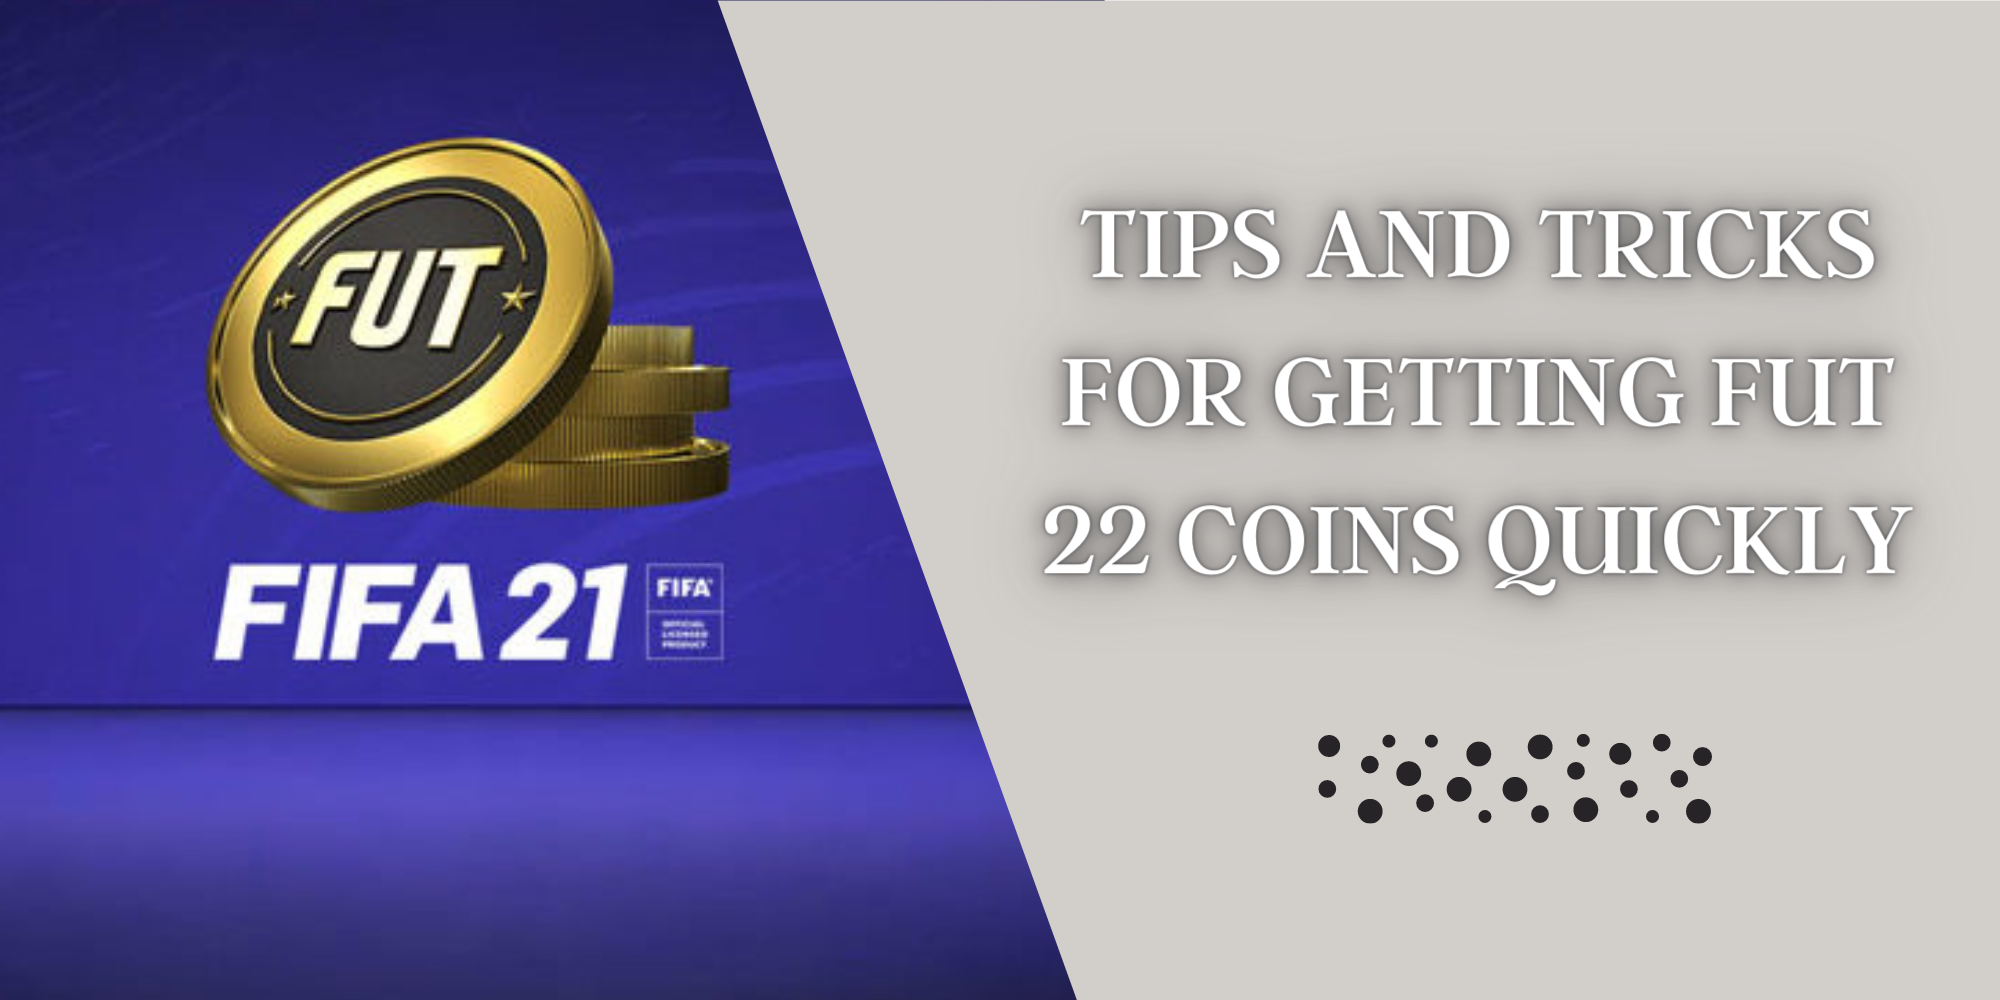 Tips and Tricks for Getting Fut 22 Coins Quickly